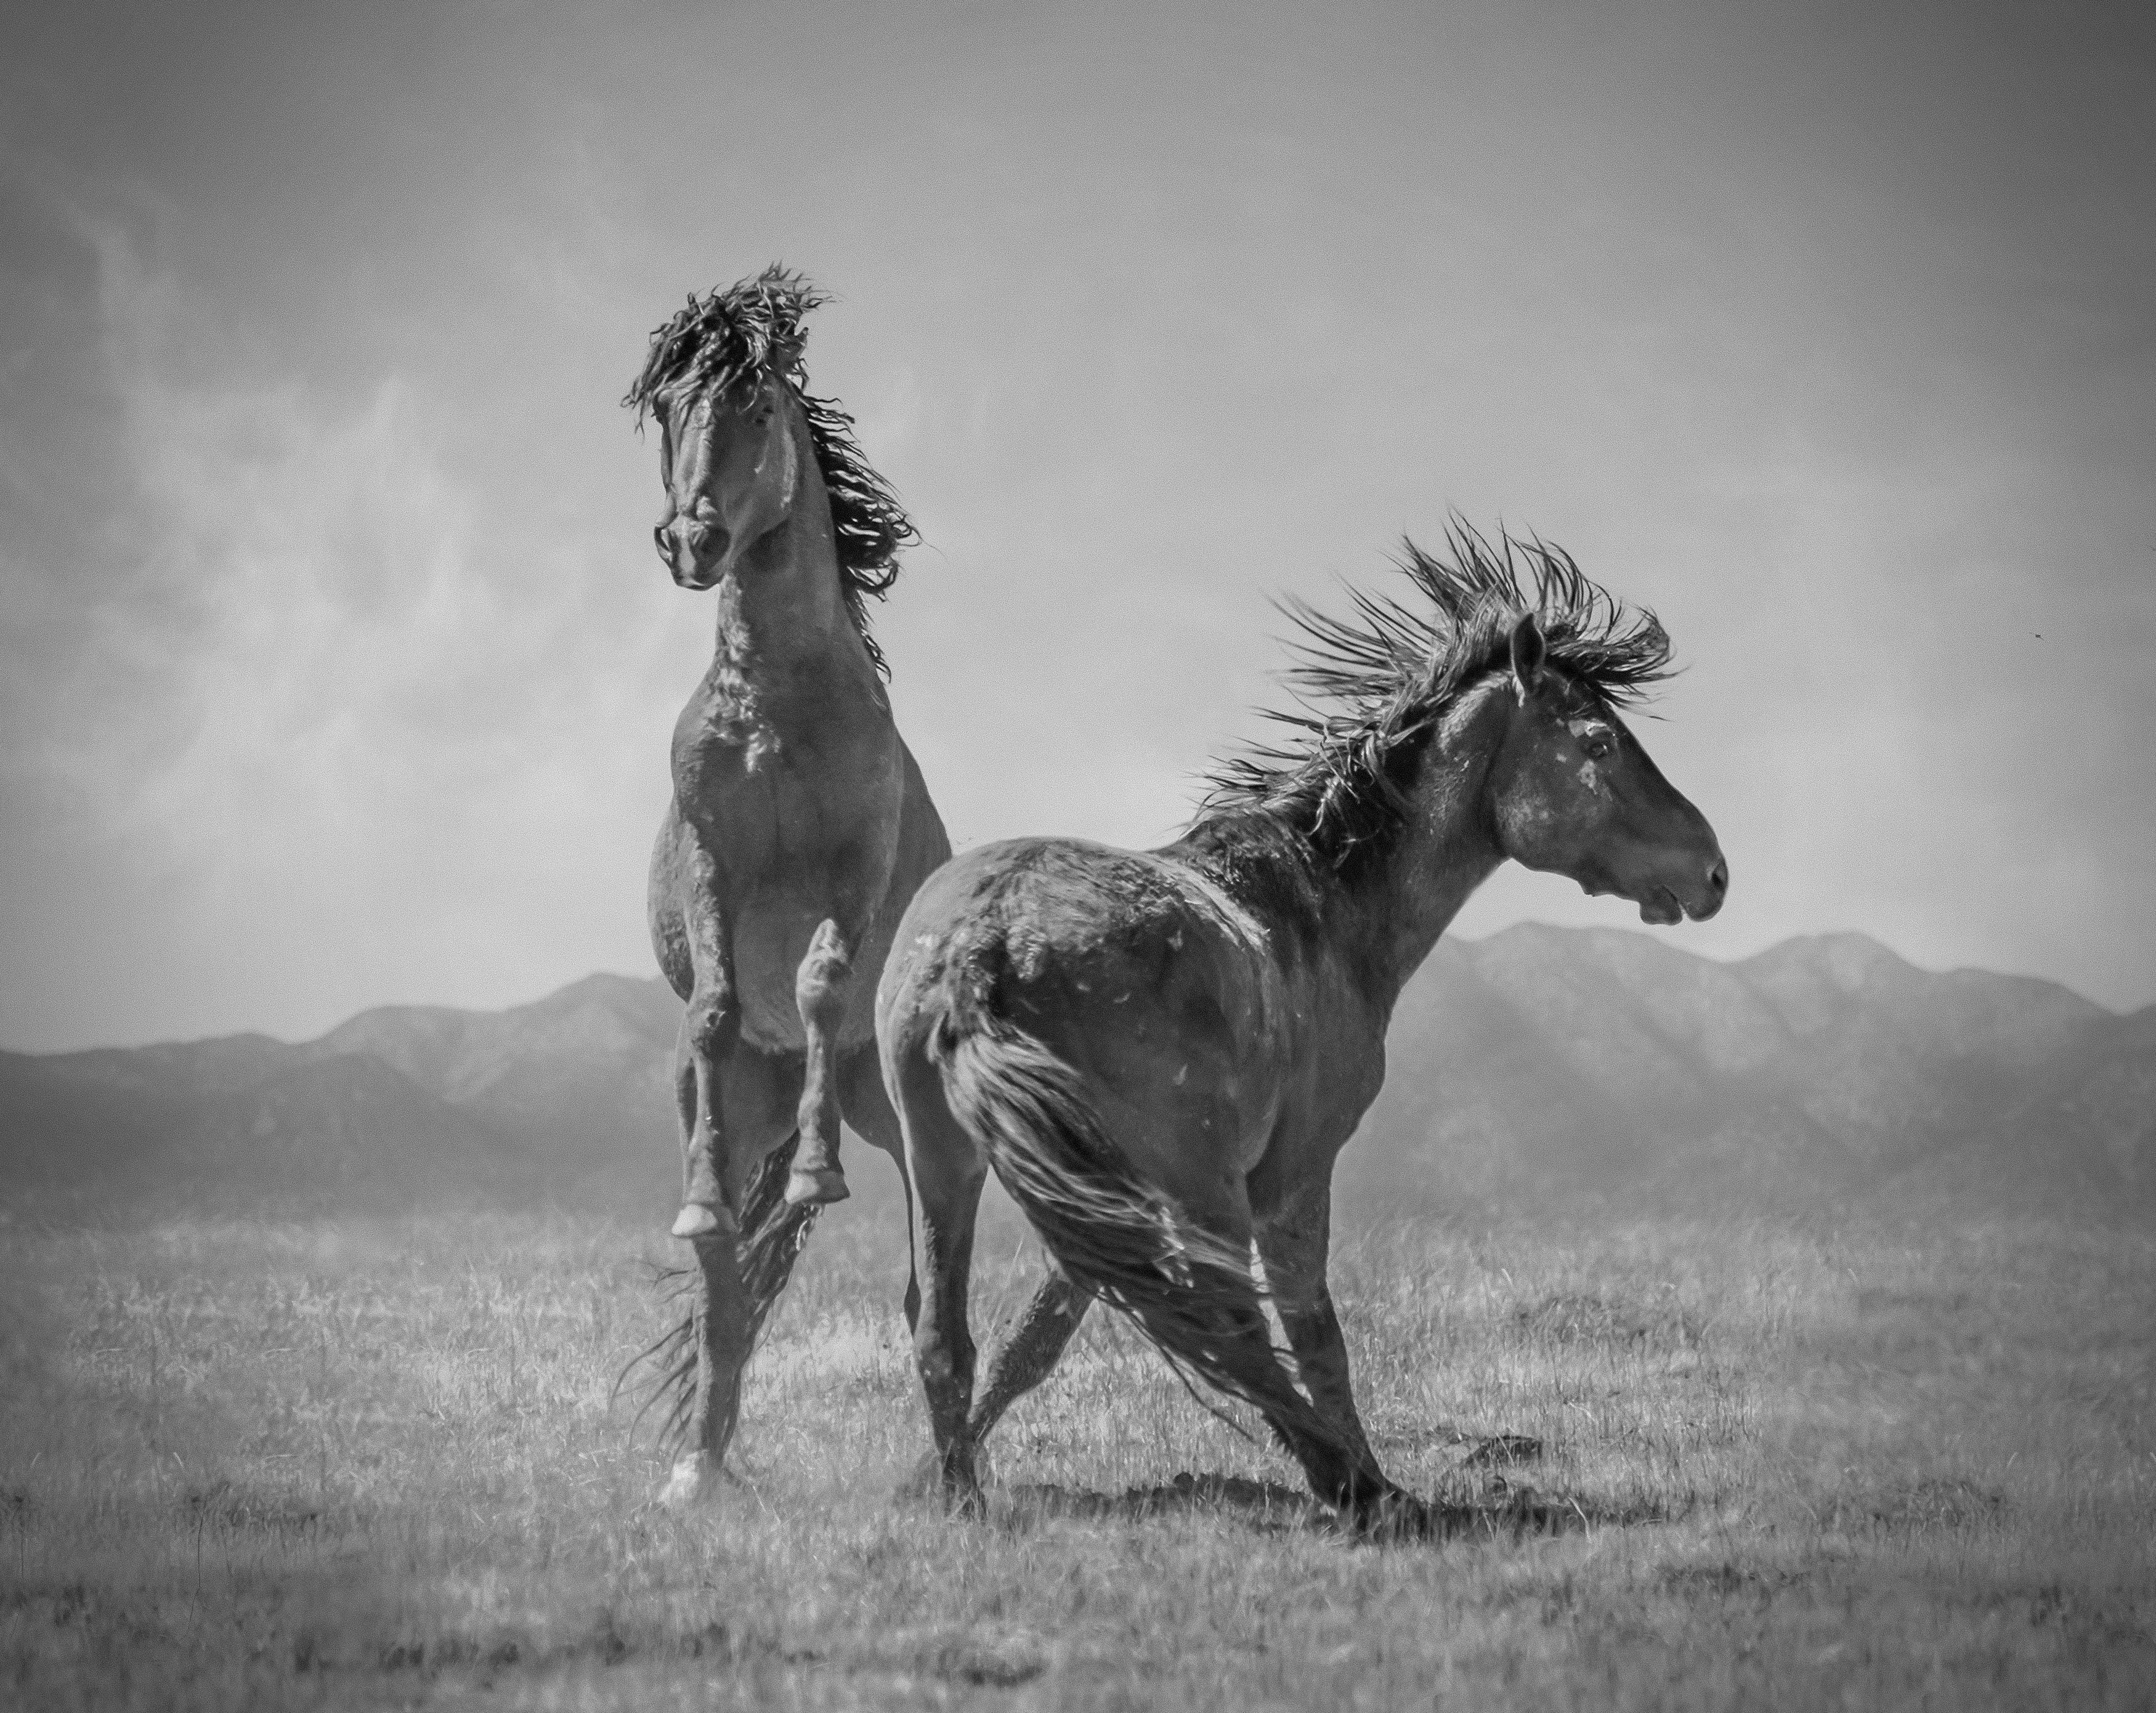 Shane Russeck Black and White Photograph - "Wonder Horses" 24x36 - Black & White Photography, Wild Horses Mustangs 